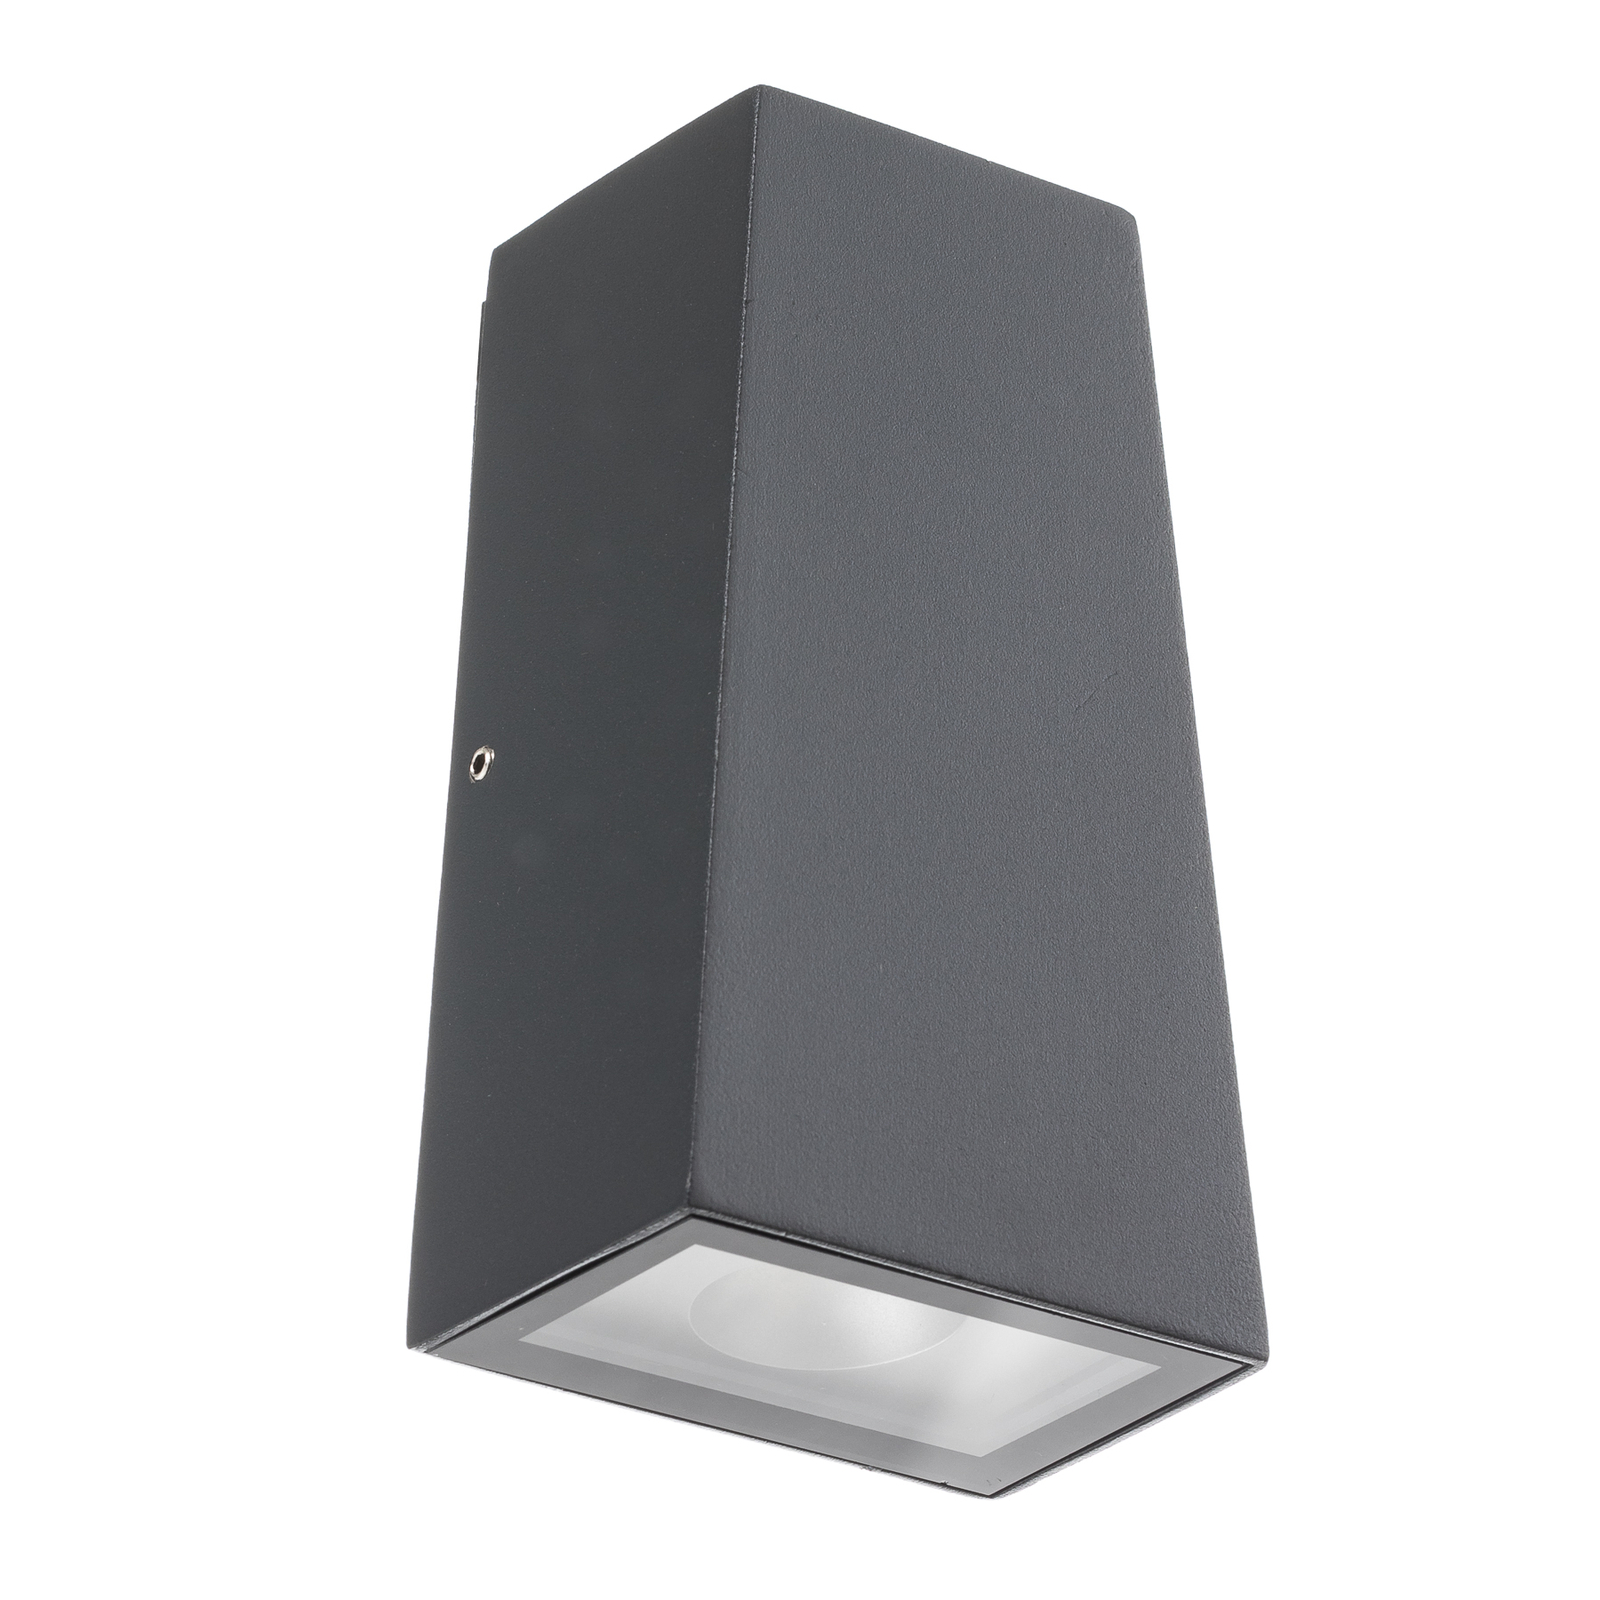 THORNeco Holly Cone Square Up/Down LED sienas lampa